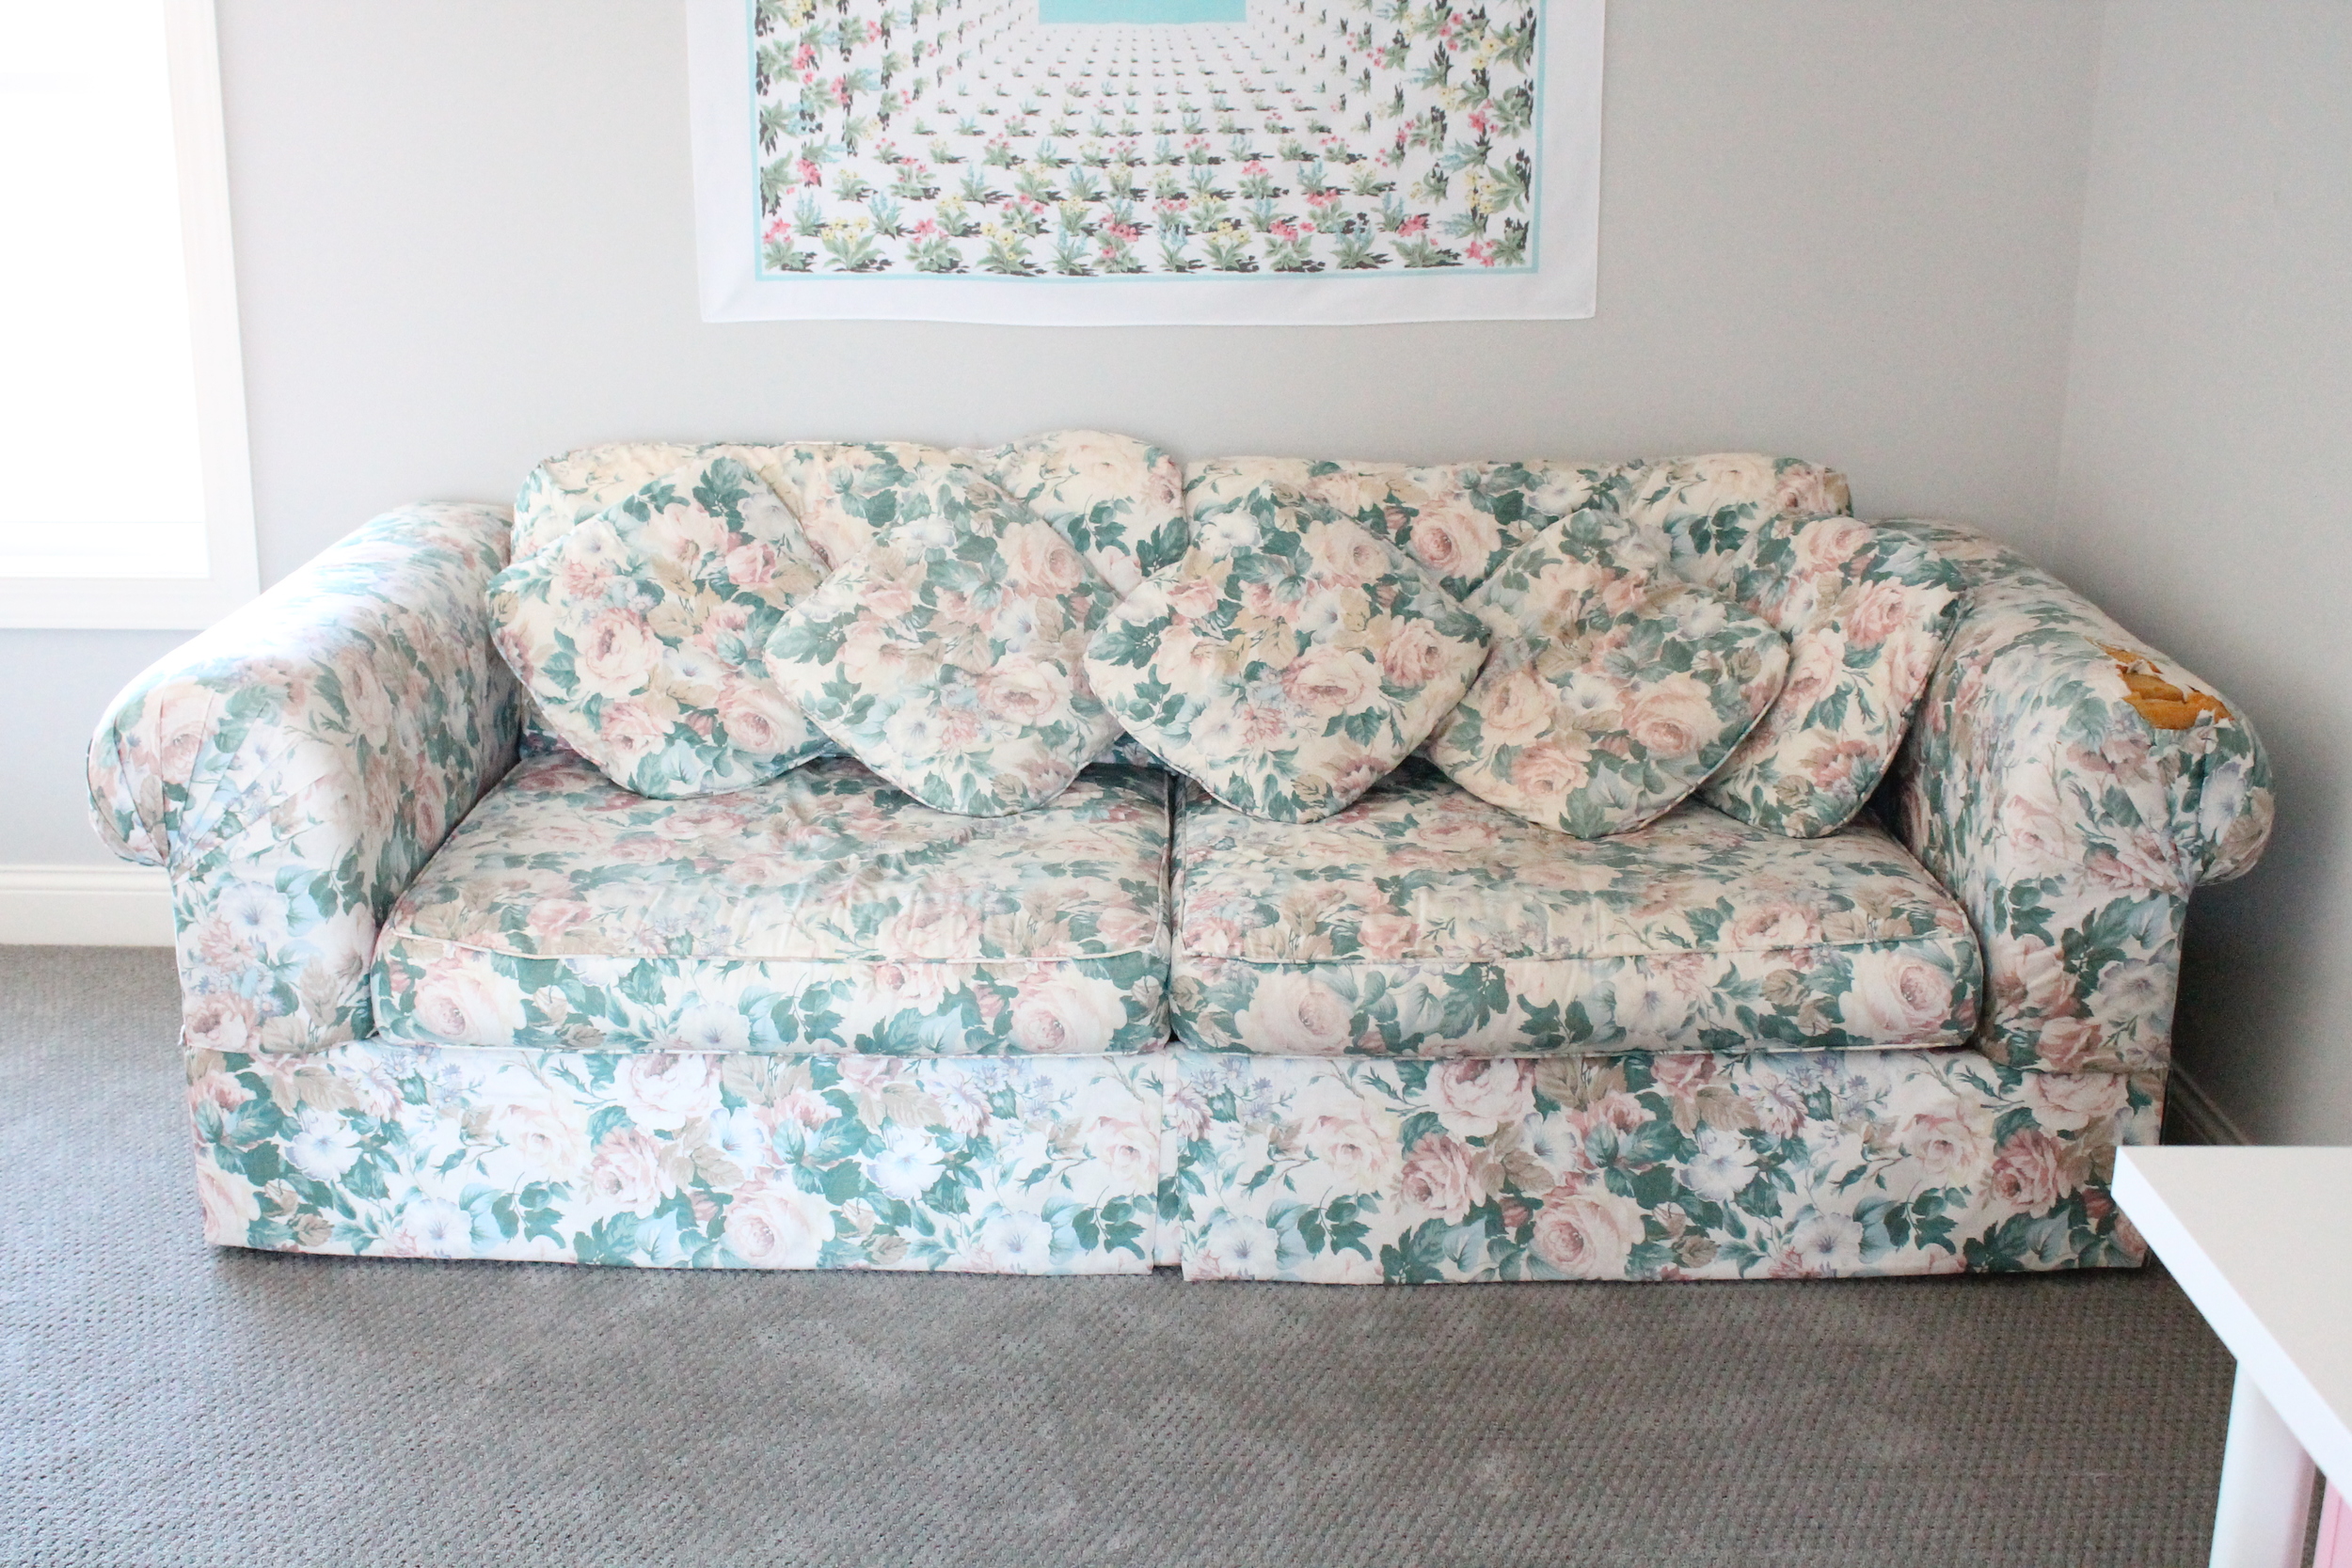 The most comfortable sofa in the world. In the family craft room.